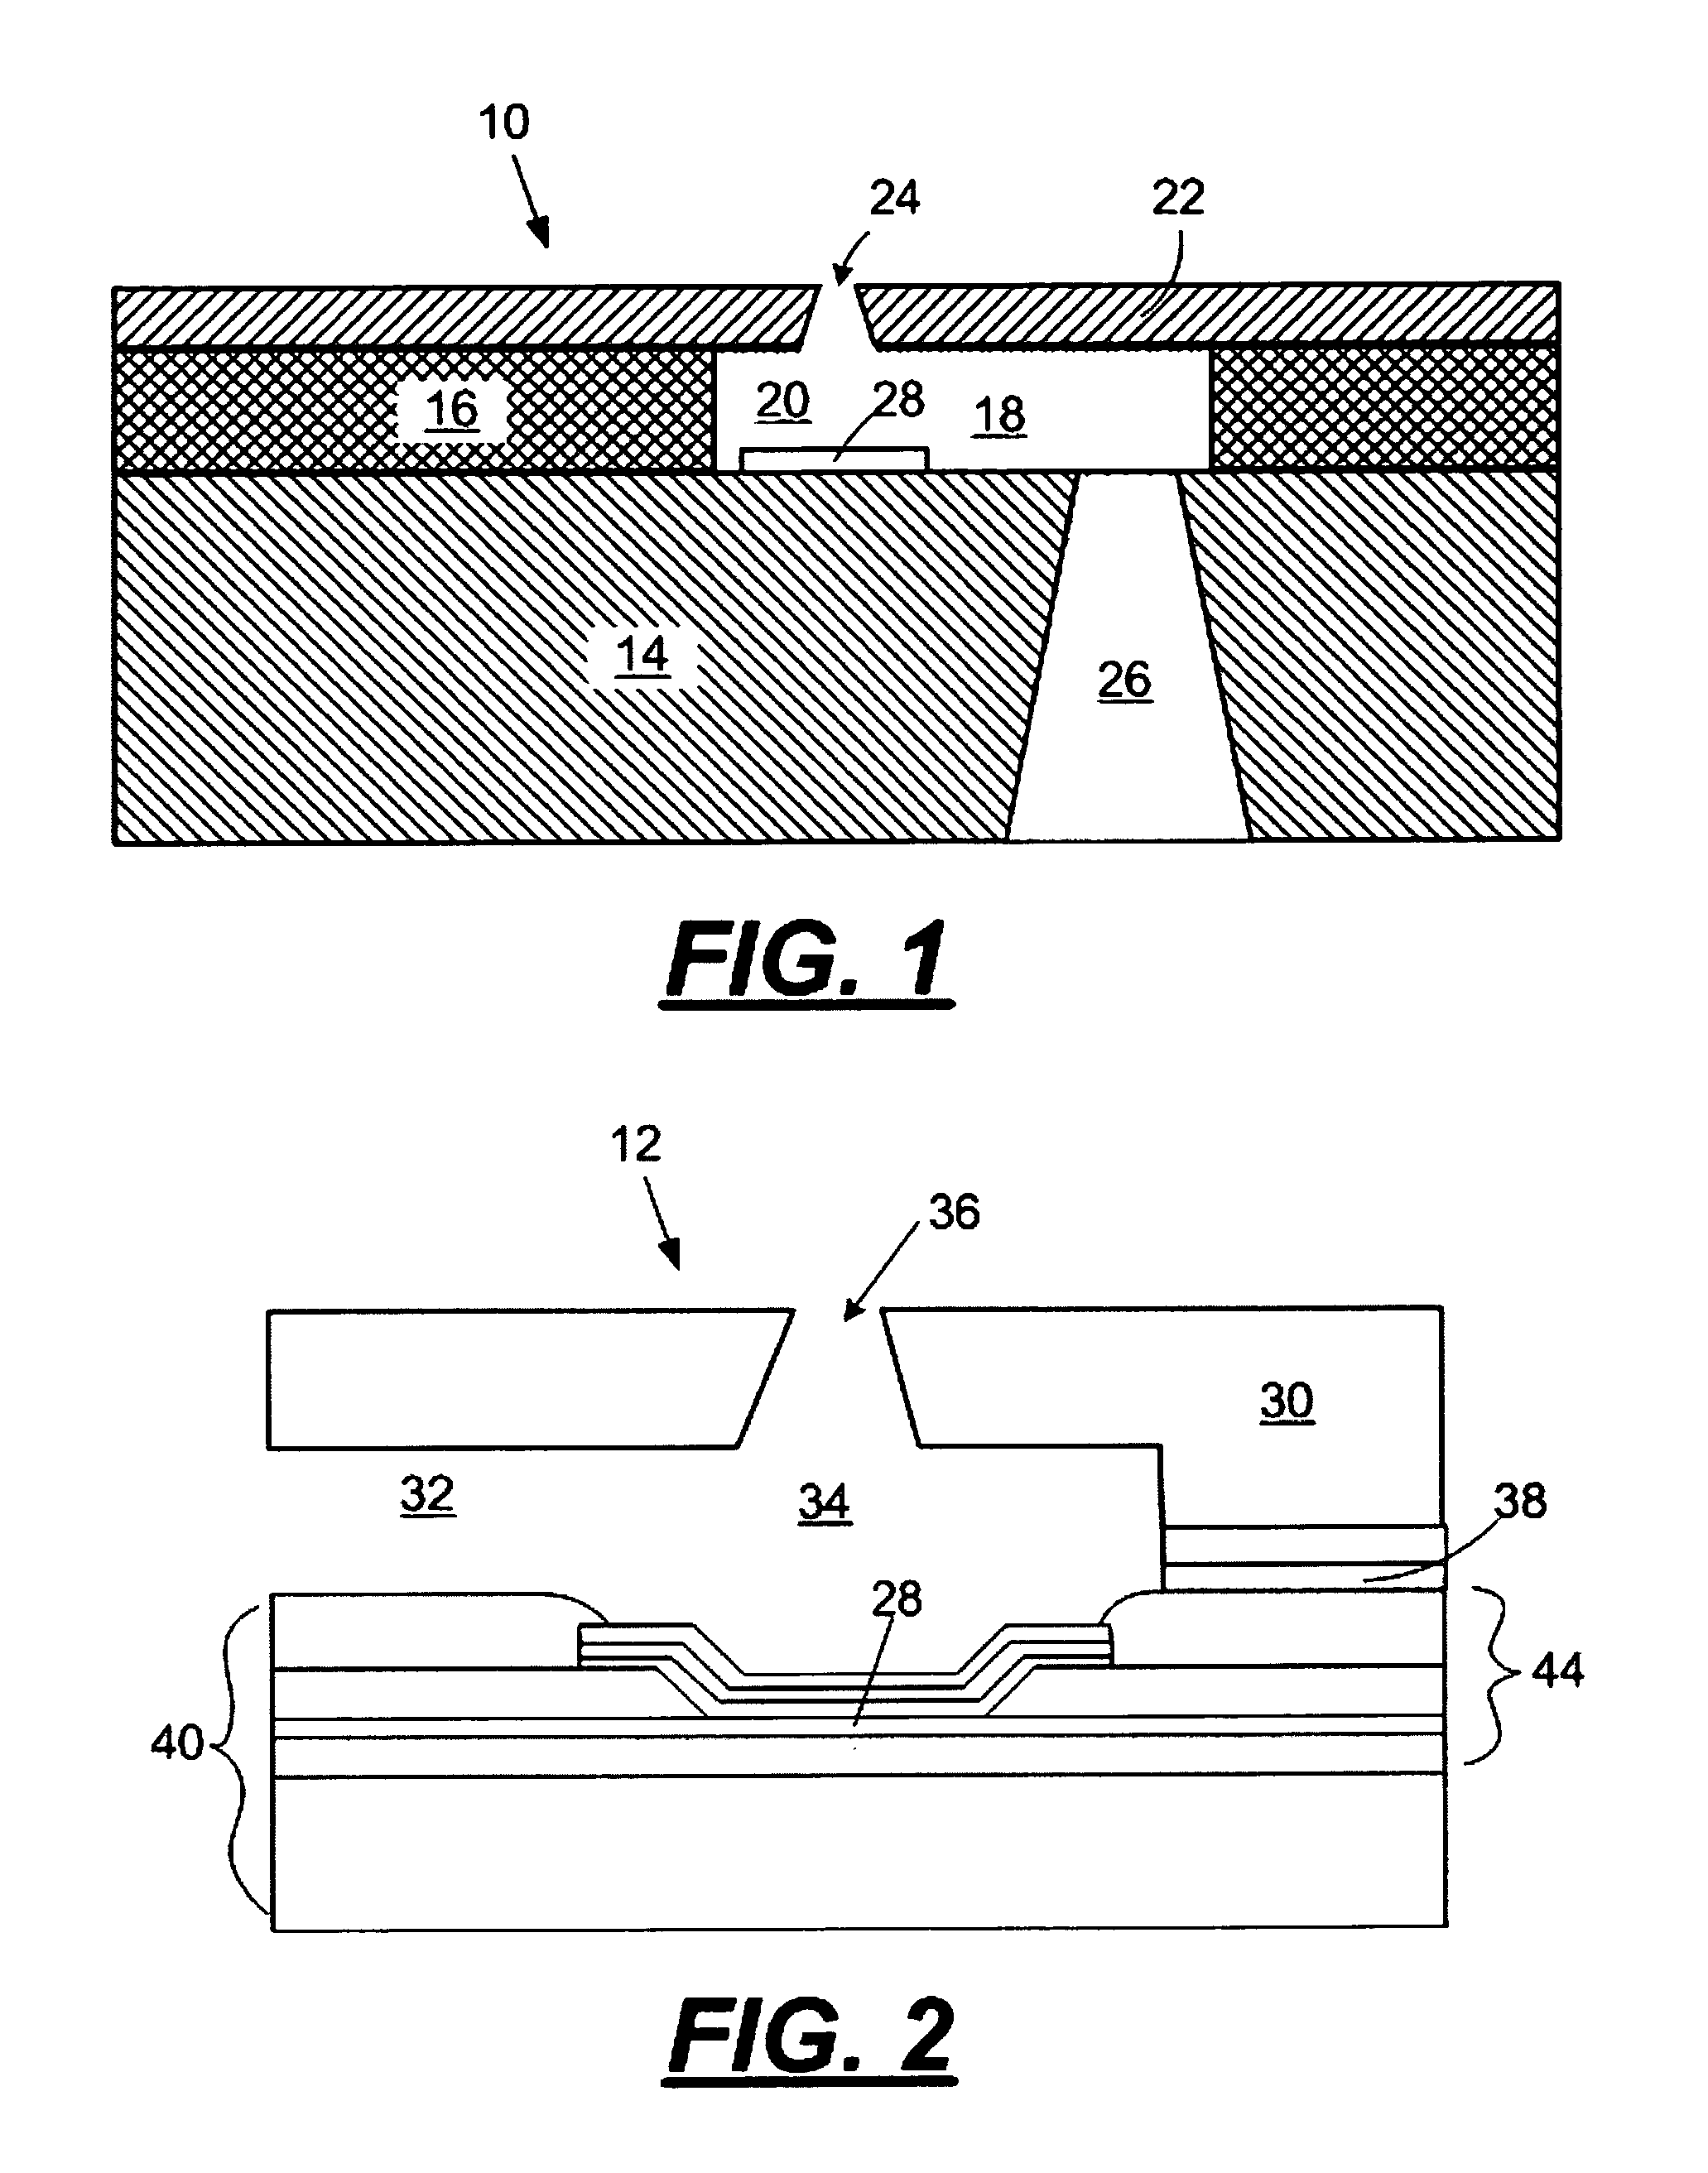 Methods for improving flow through fluidic channels